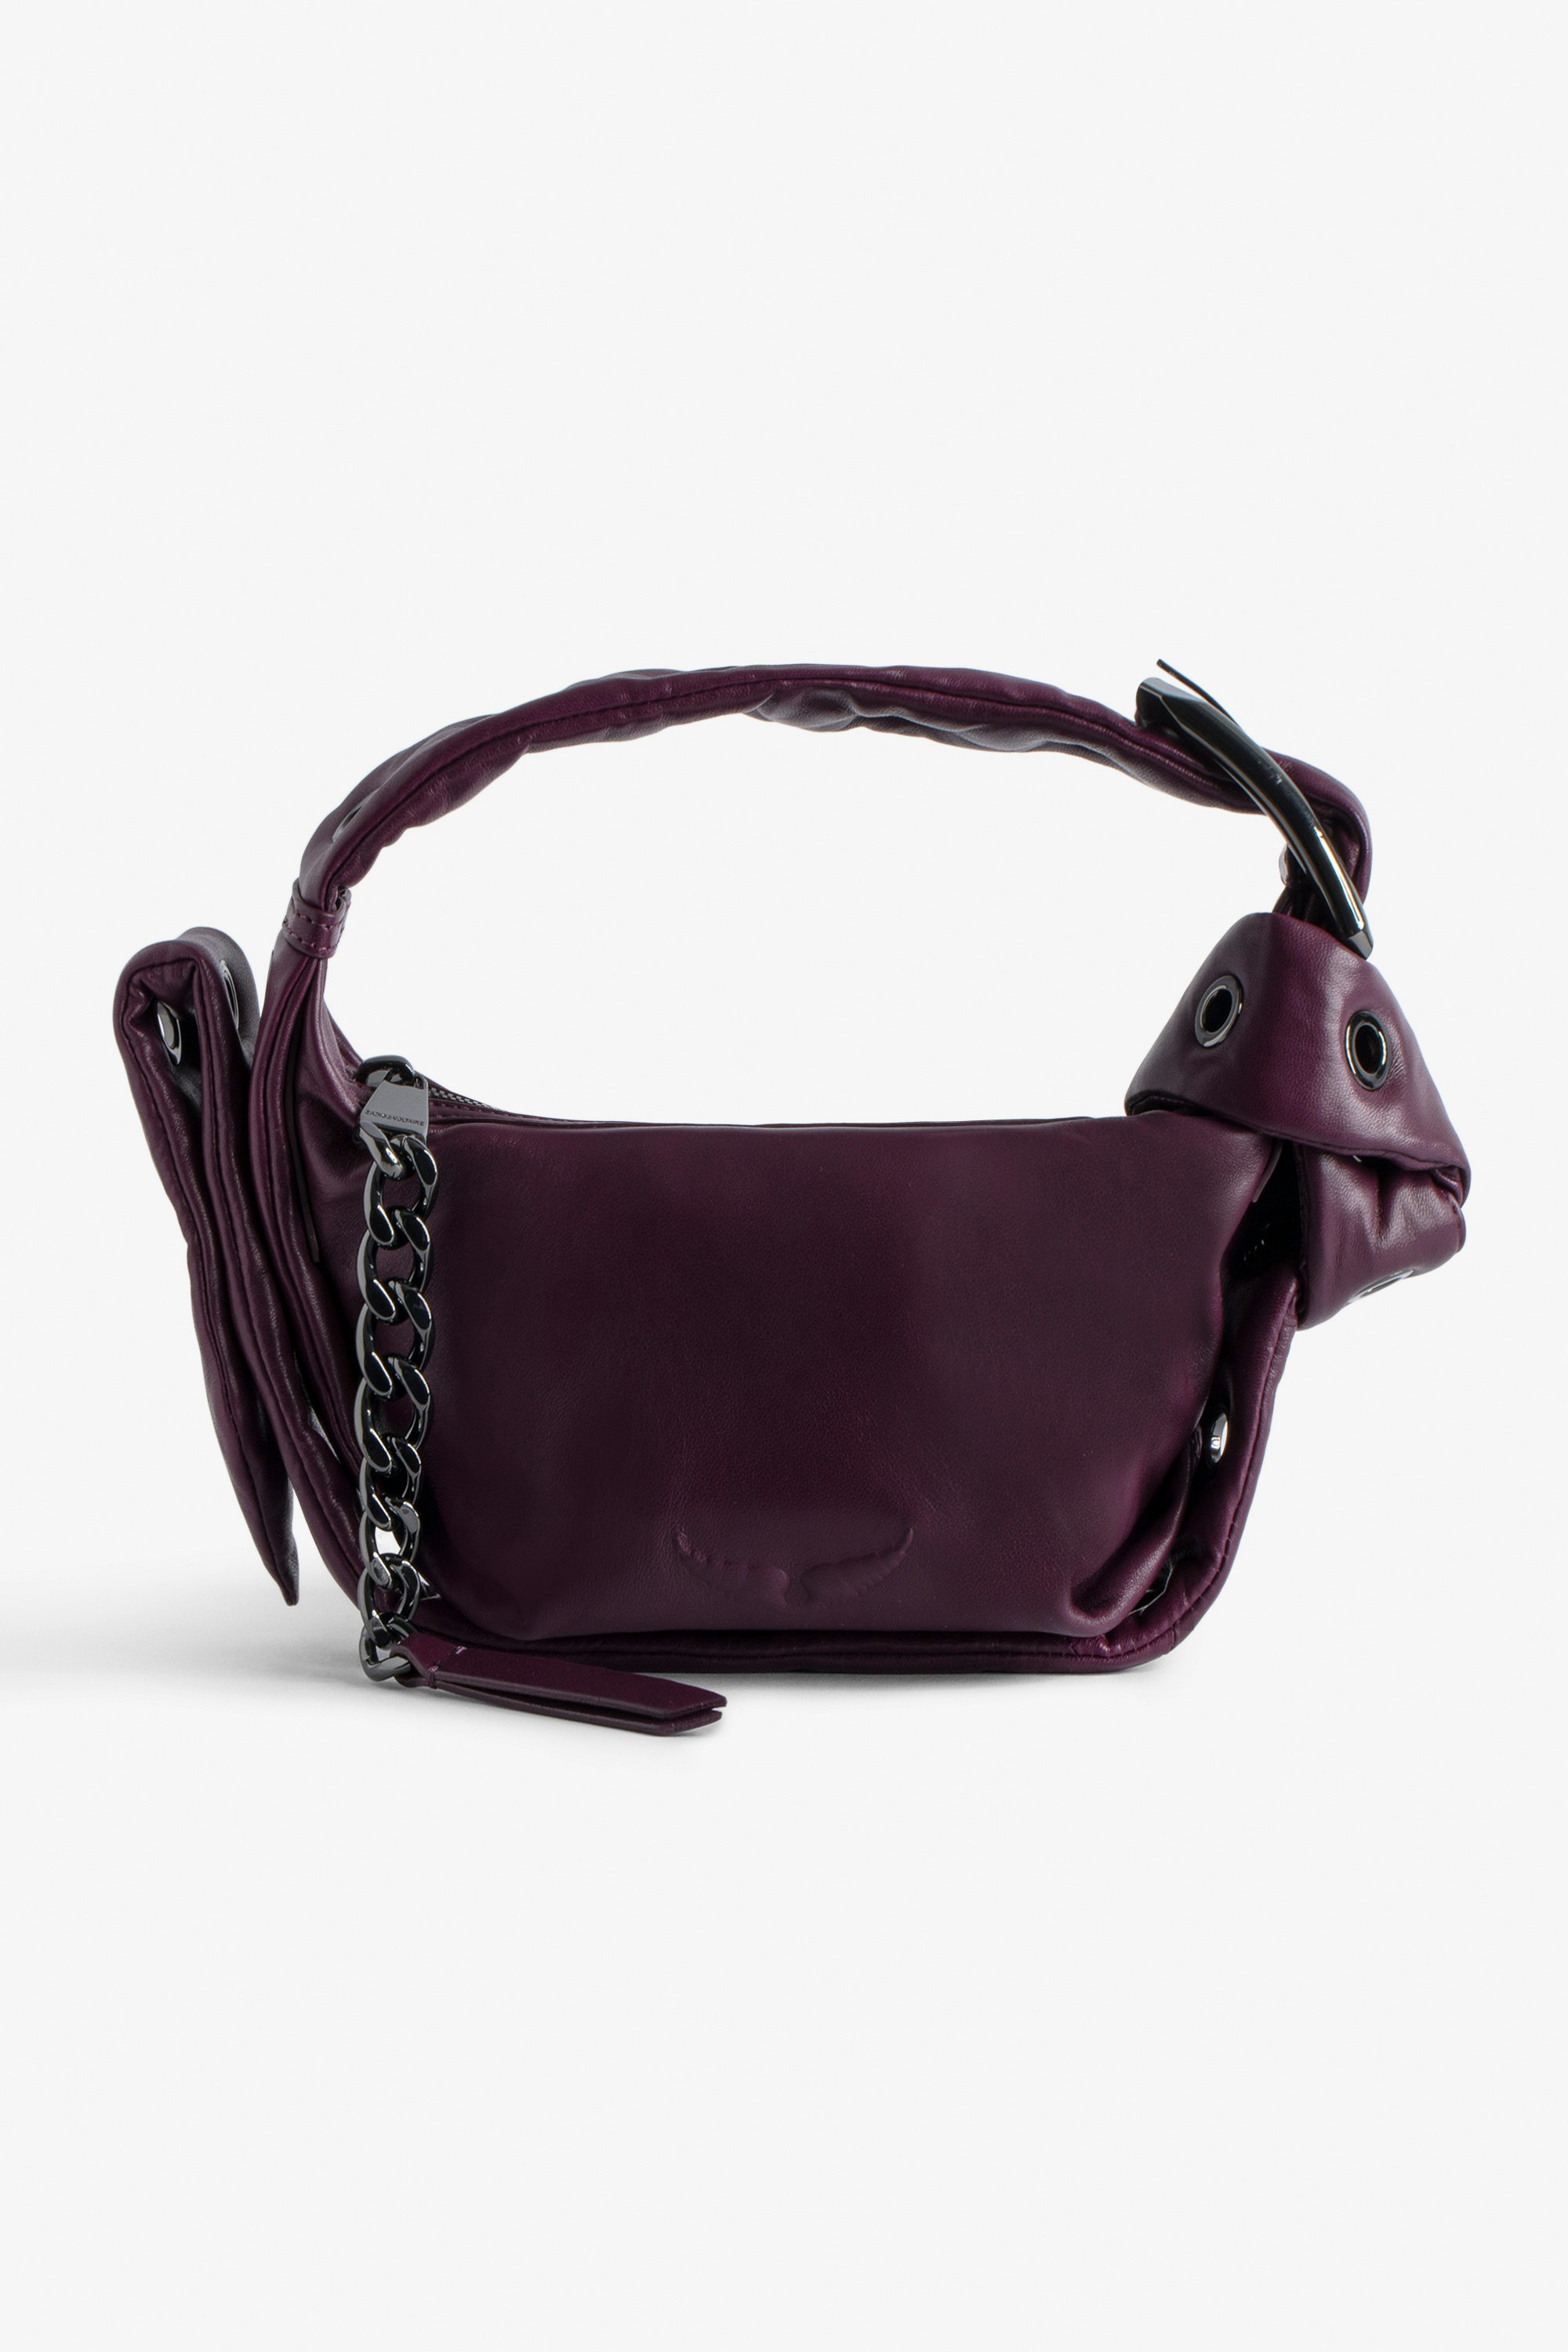 Le Cecilia XS Obsession Bag - Women’s small burgundy smooth leather bag with shoulder strap and metal C buckle.